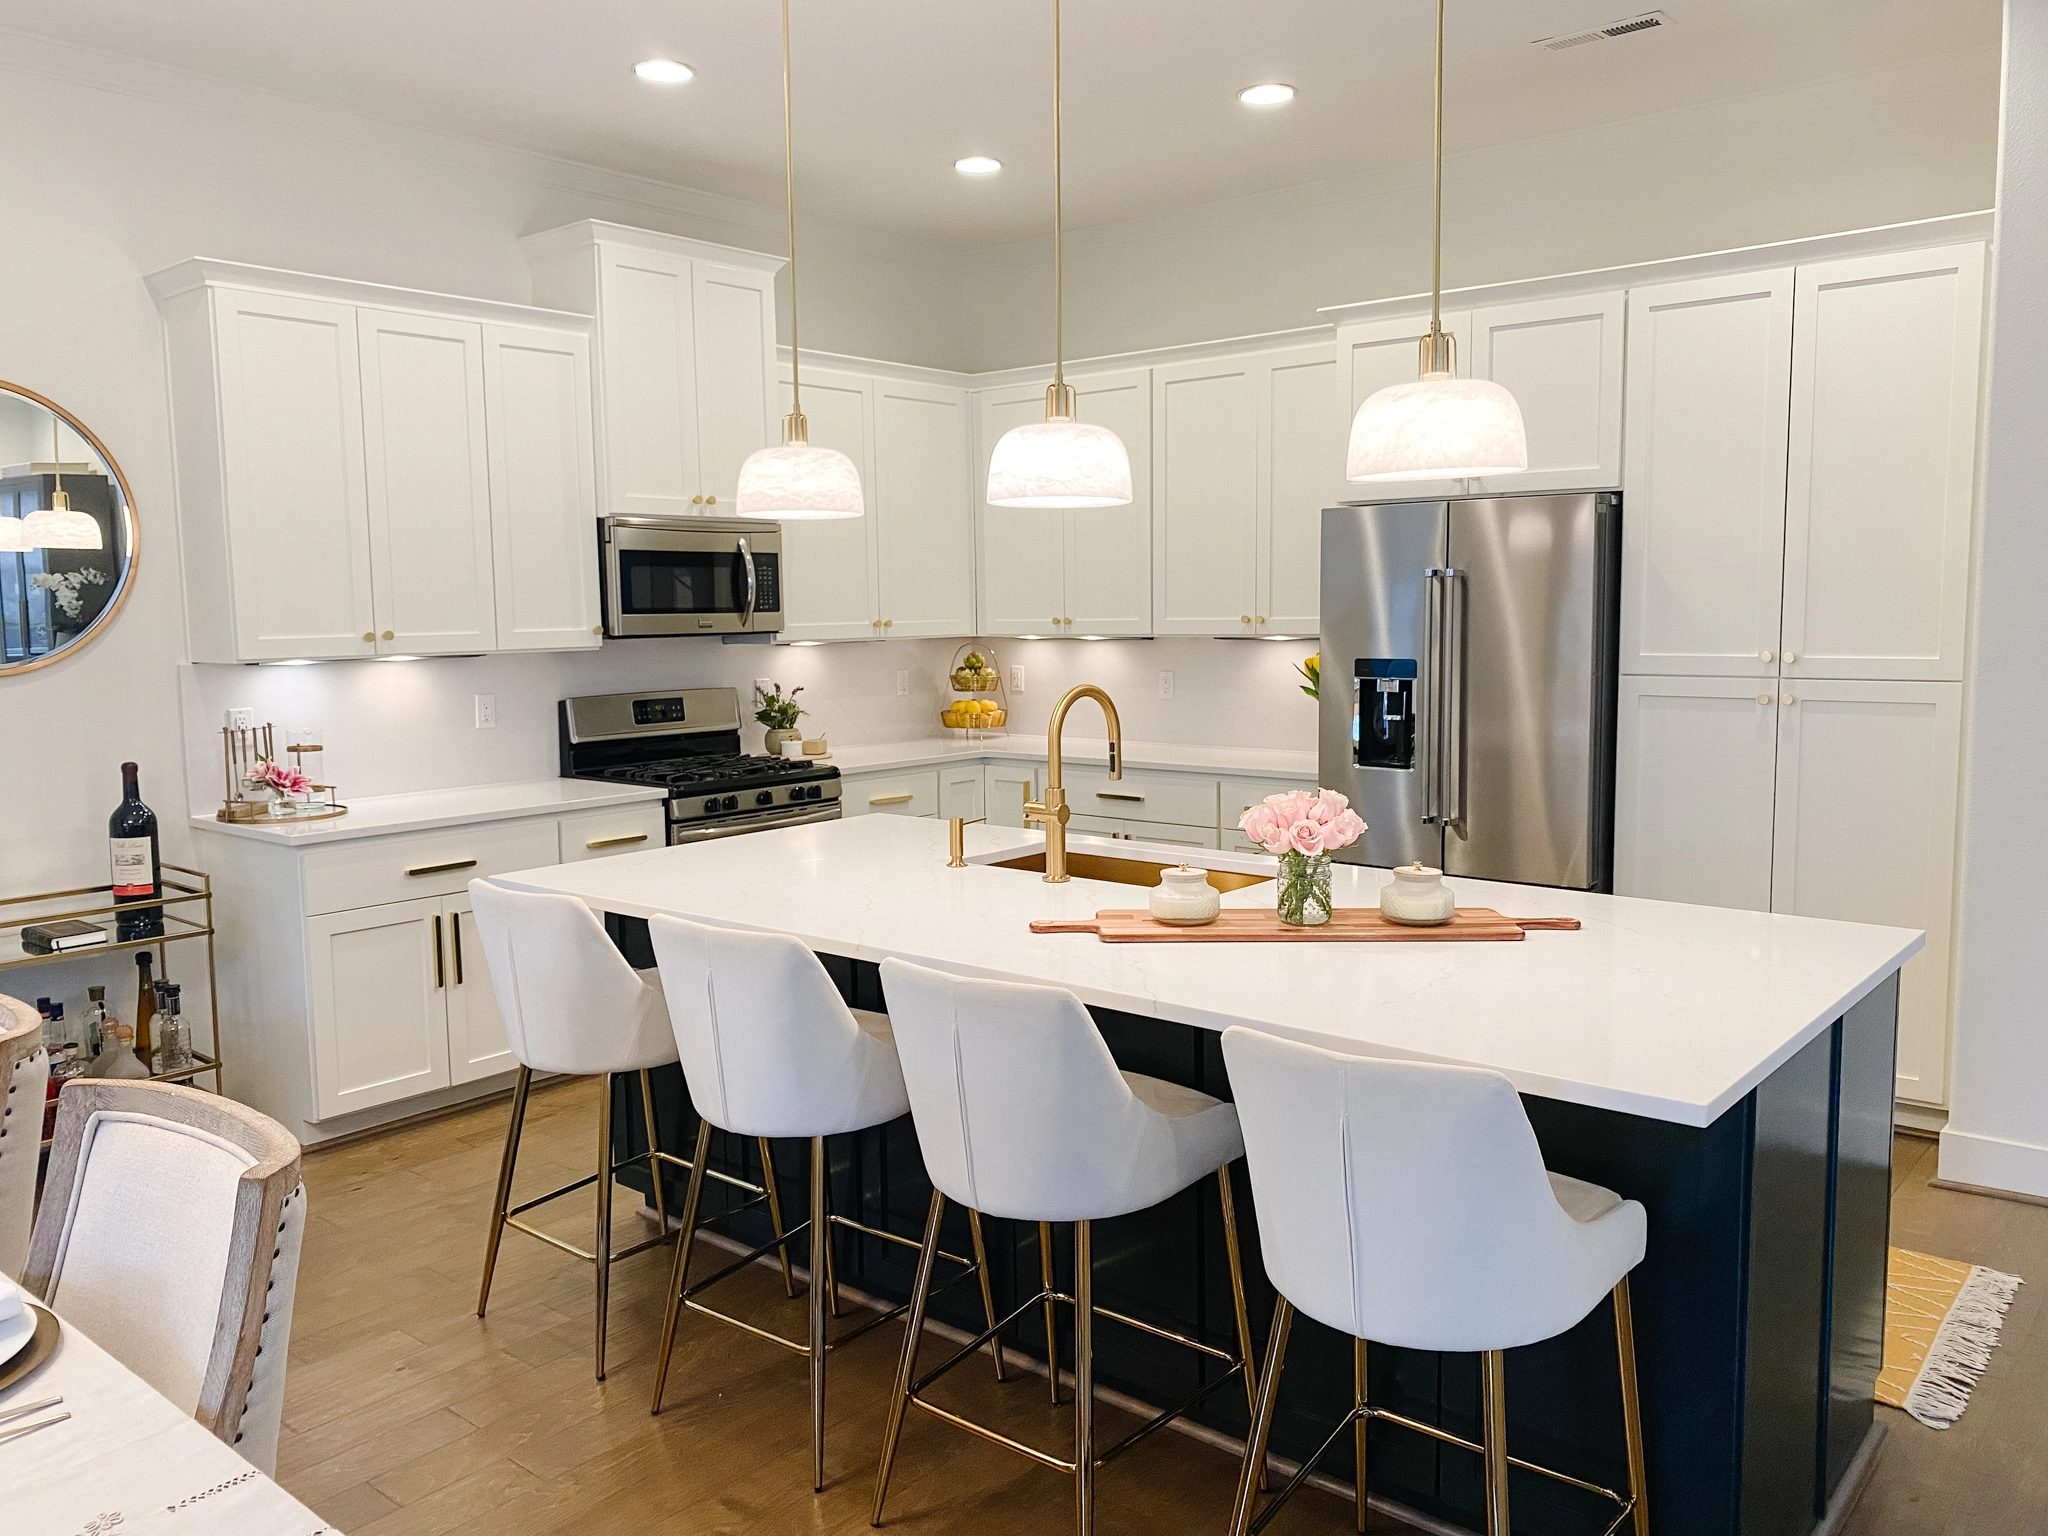 Kitchen Refresh Remodeling Cost in Portland, Or -Woodland Construction Group